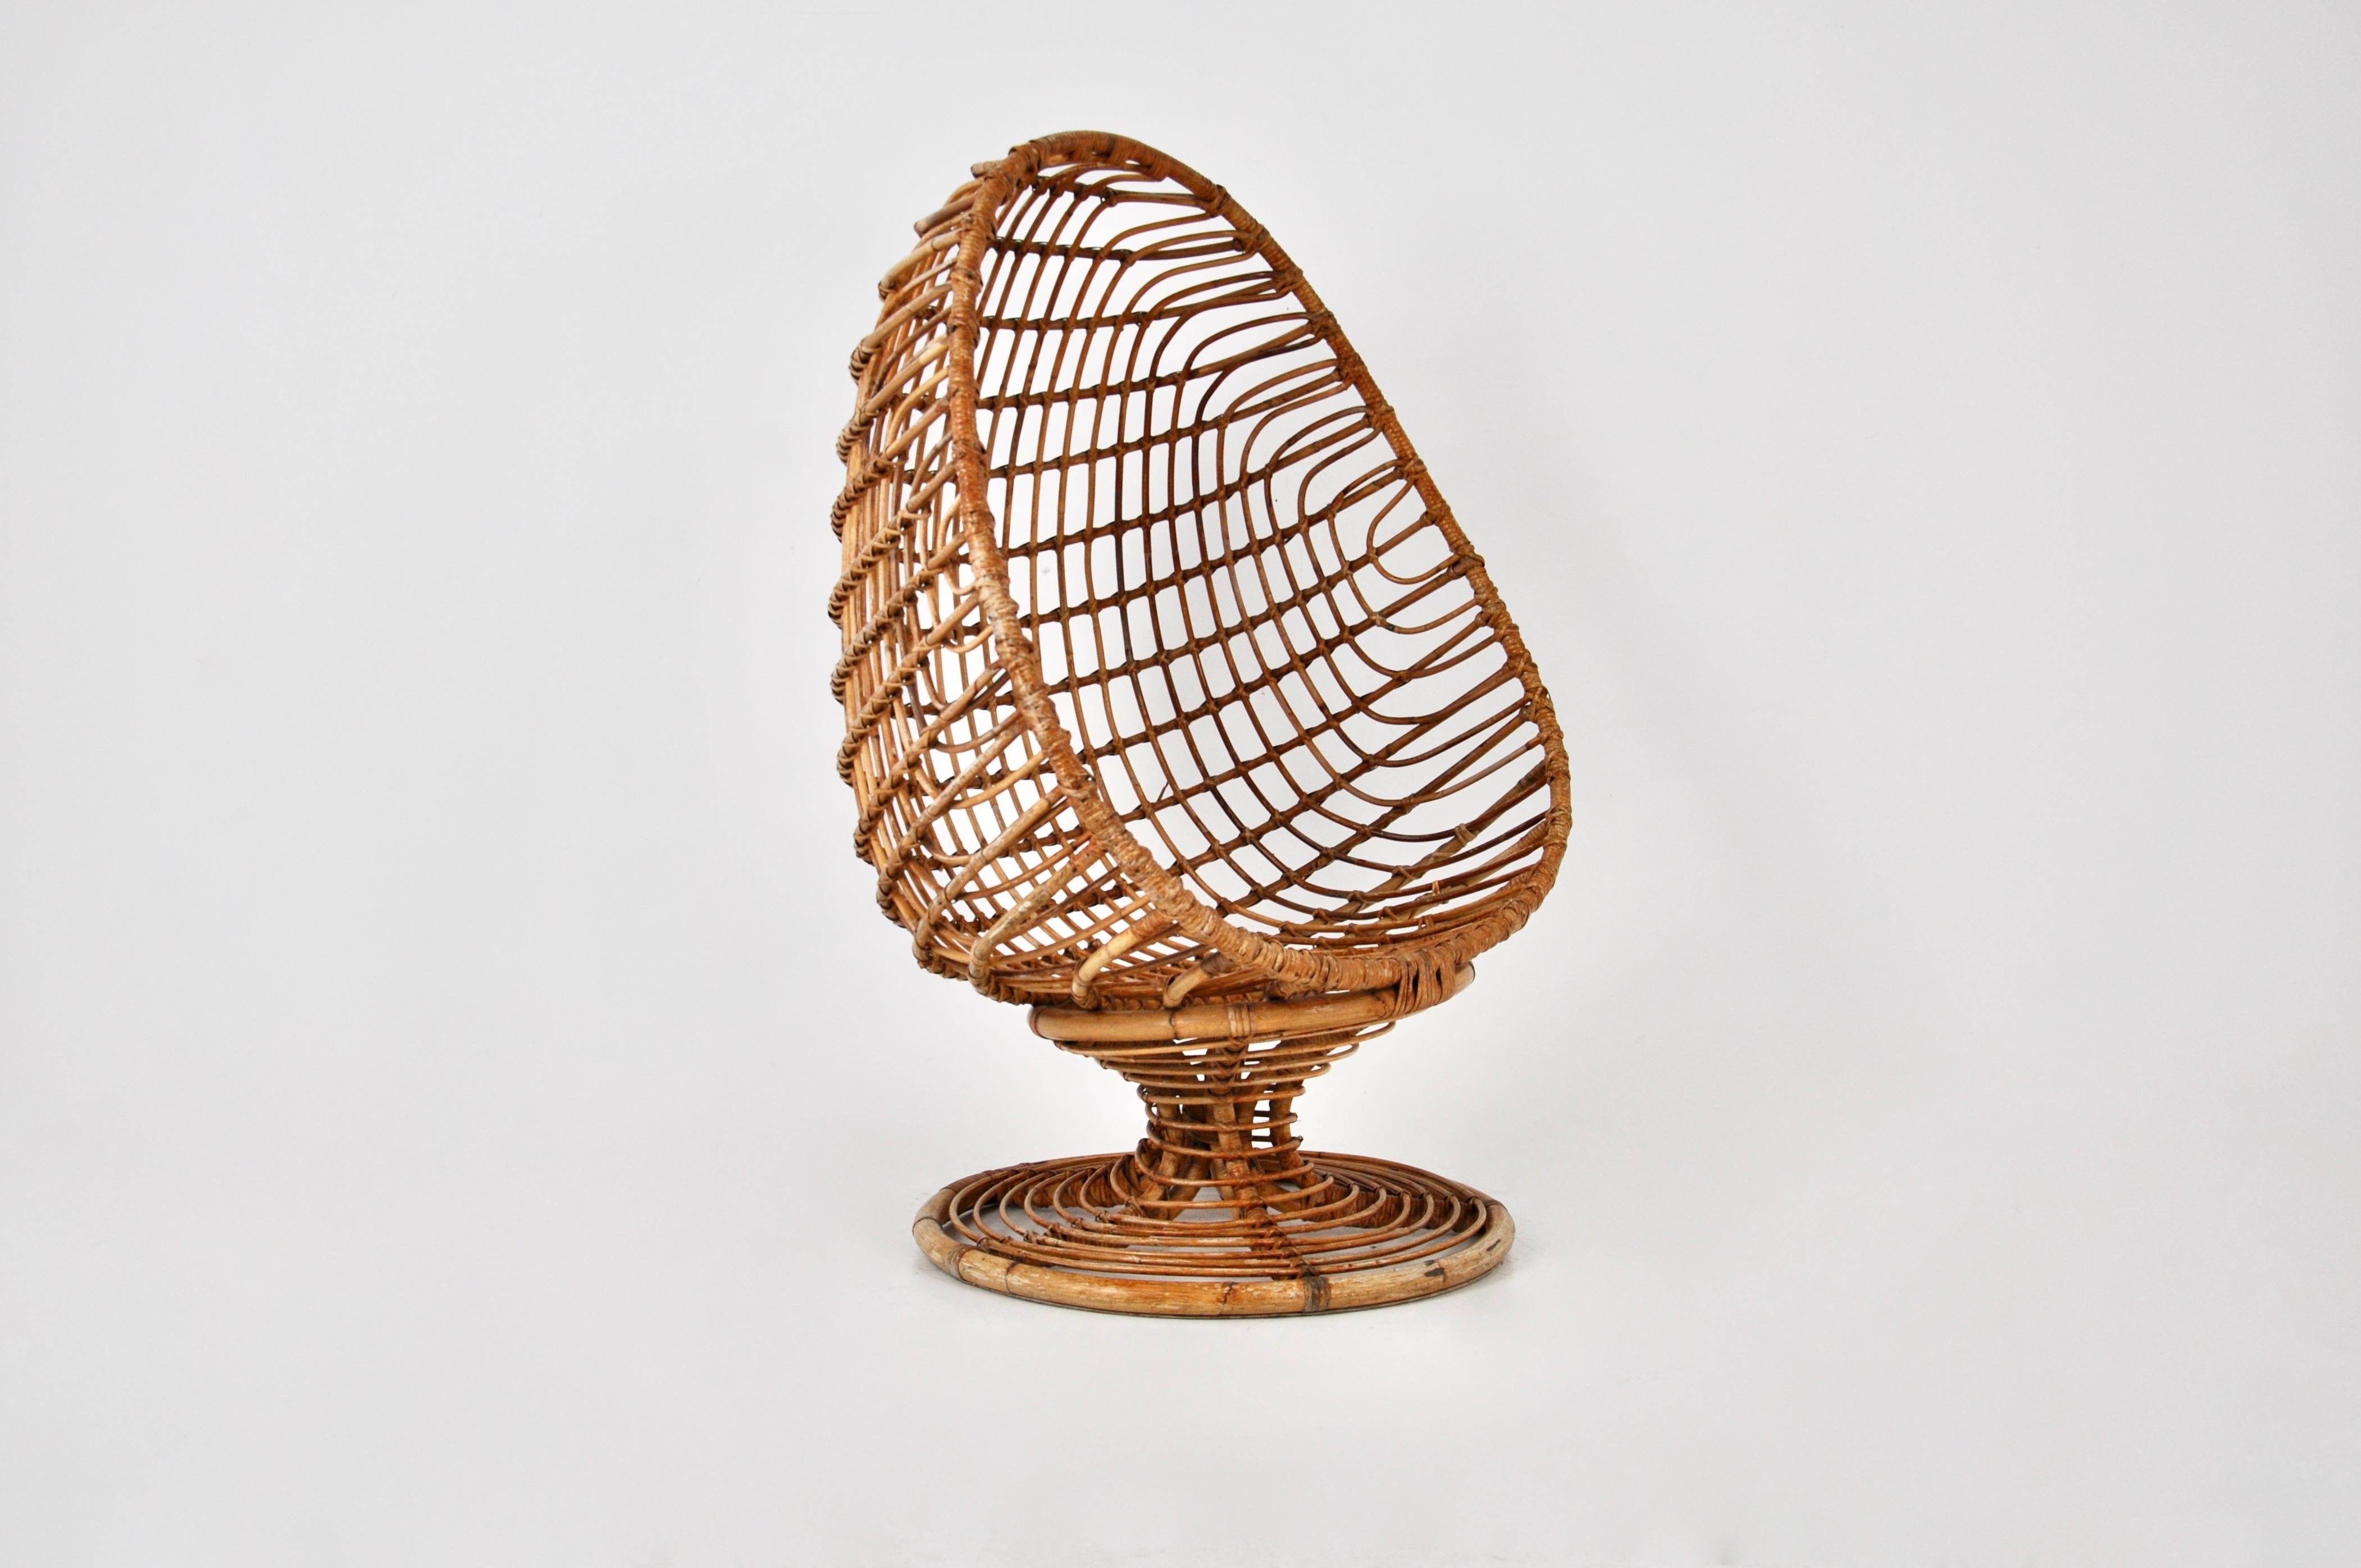 Rattan Egg armchair. Seat height: 40cm. Wear and tear due to time and age of the armchairs.